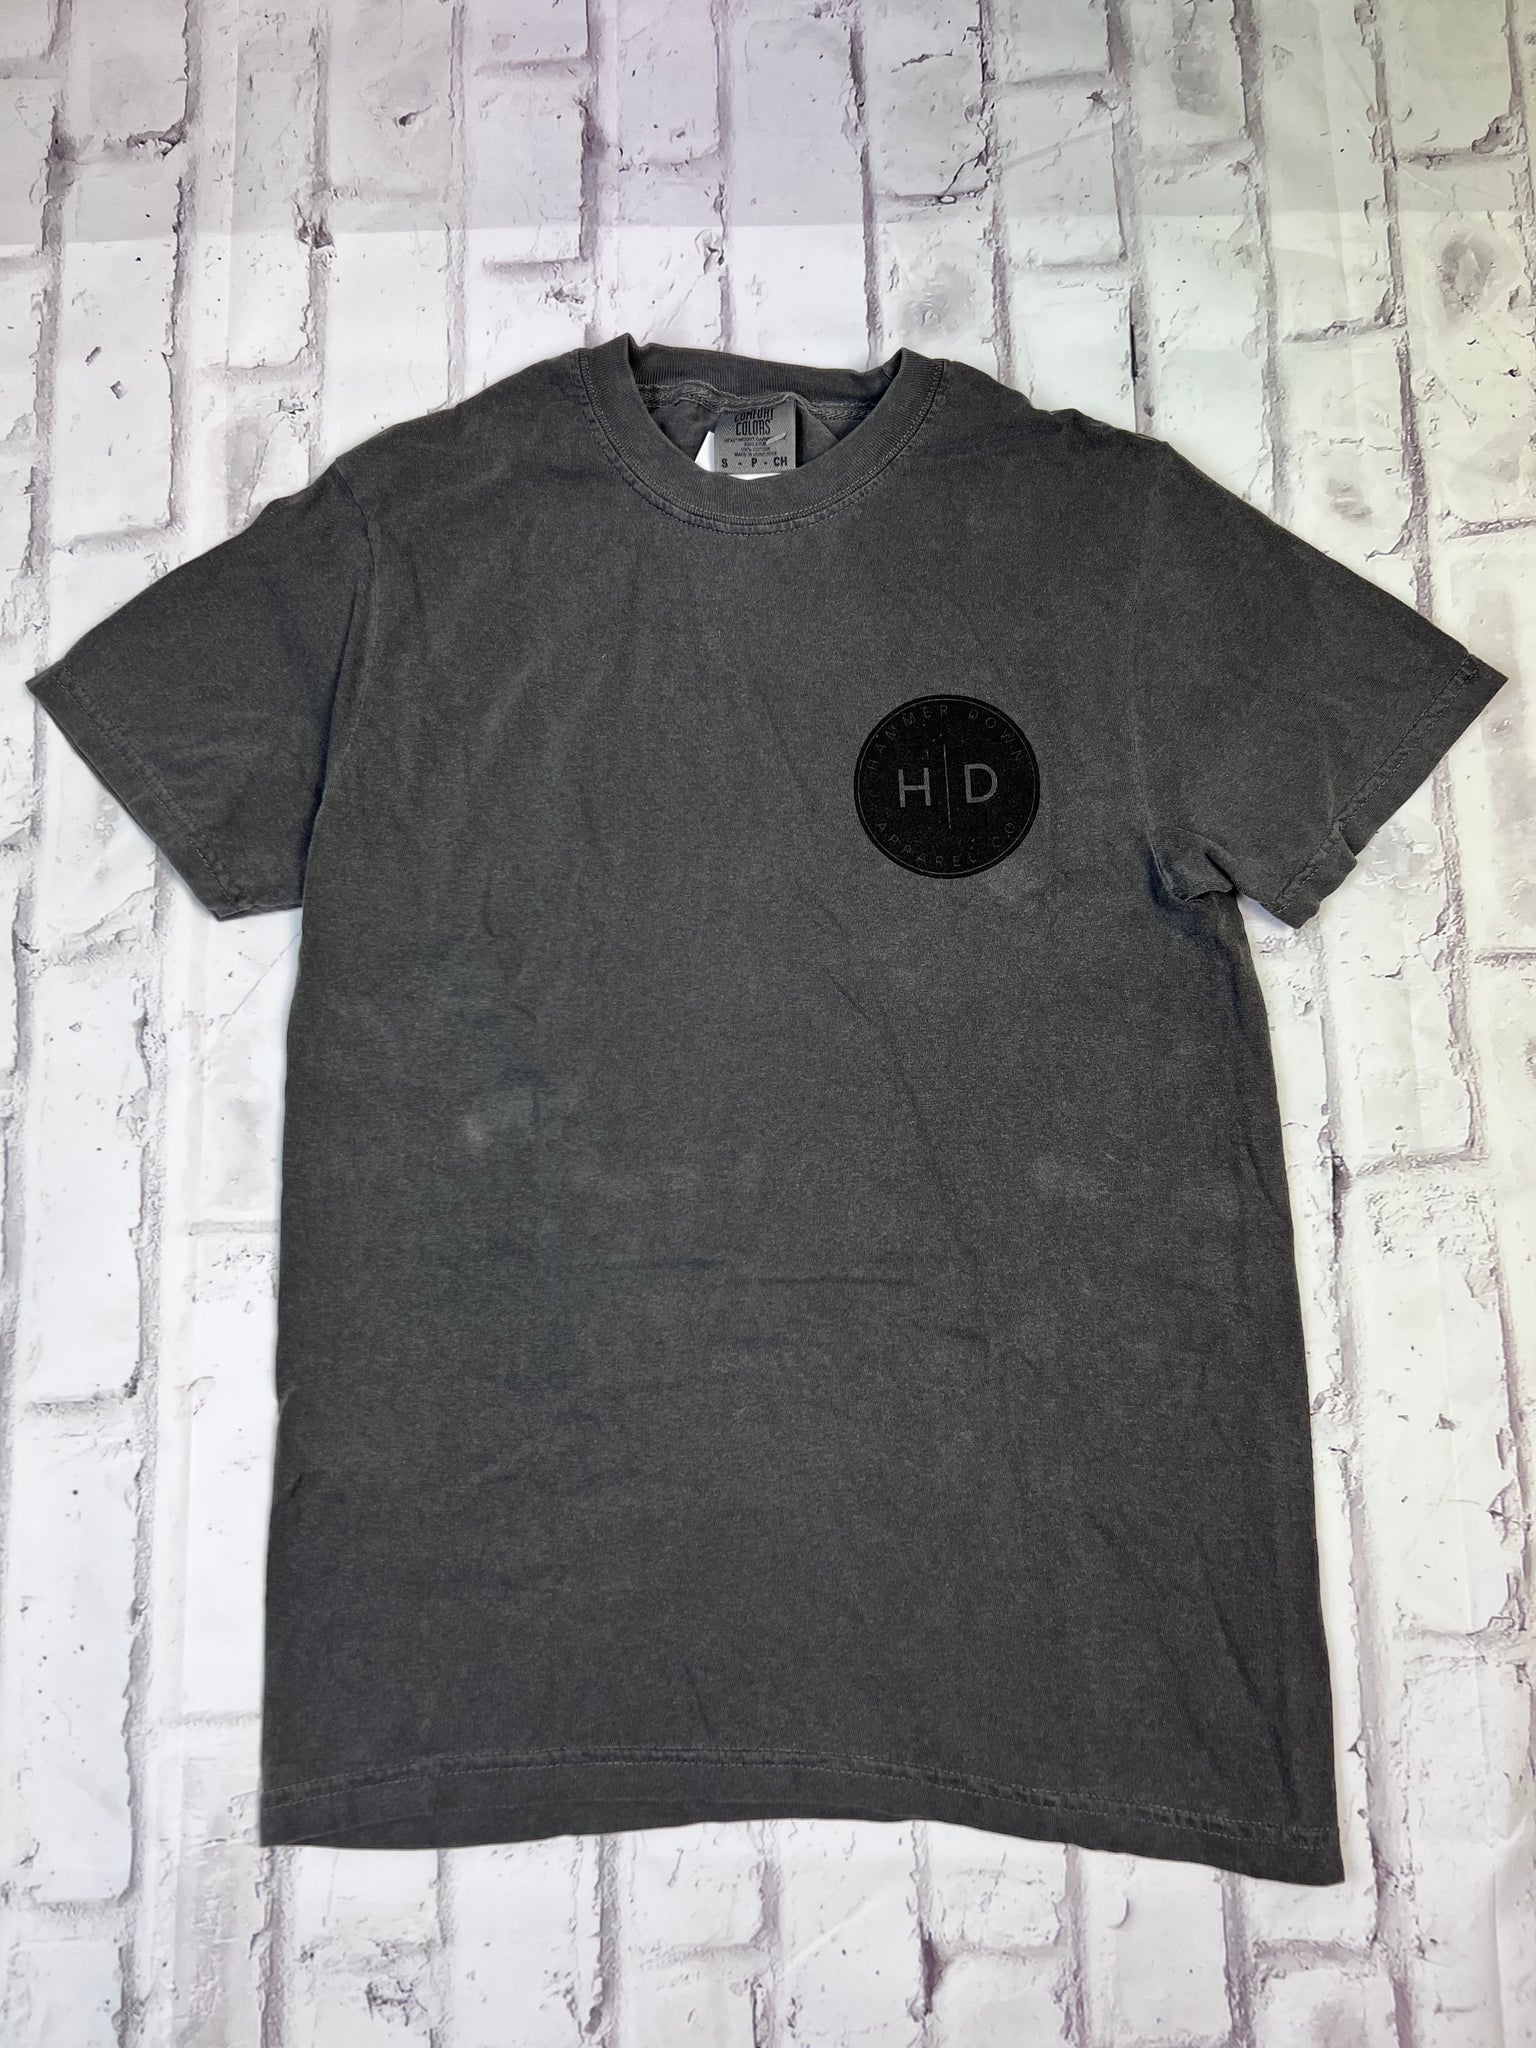 Hammer Down "Company Stamp" Short Sleeve T-shirt - Charcoal